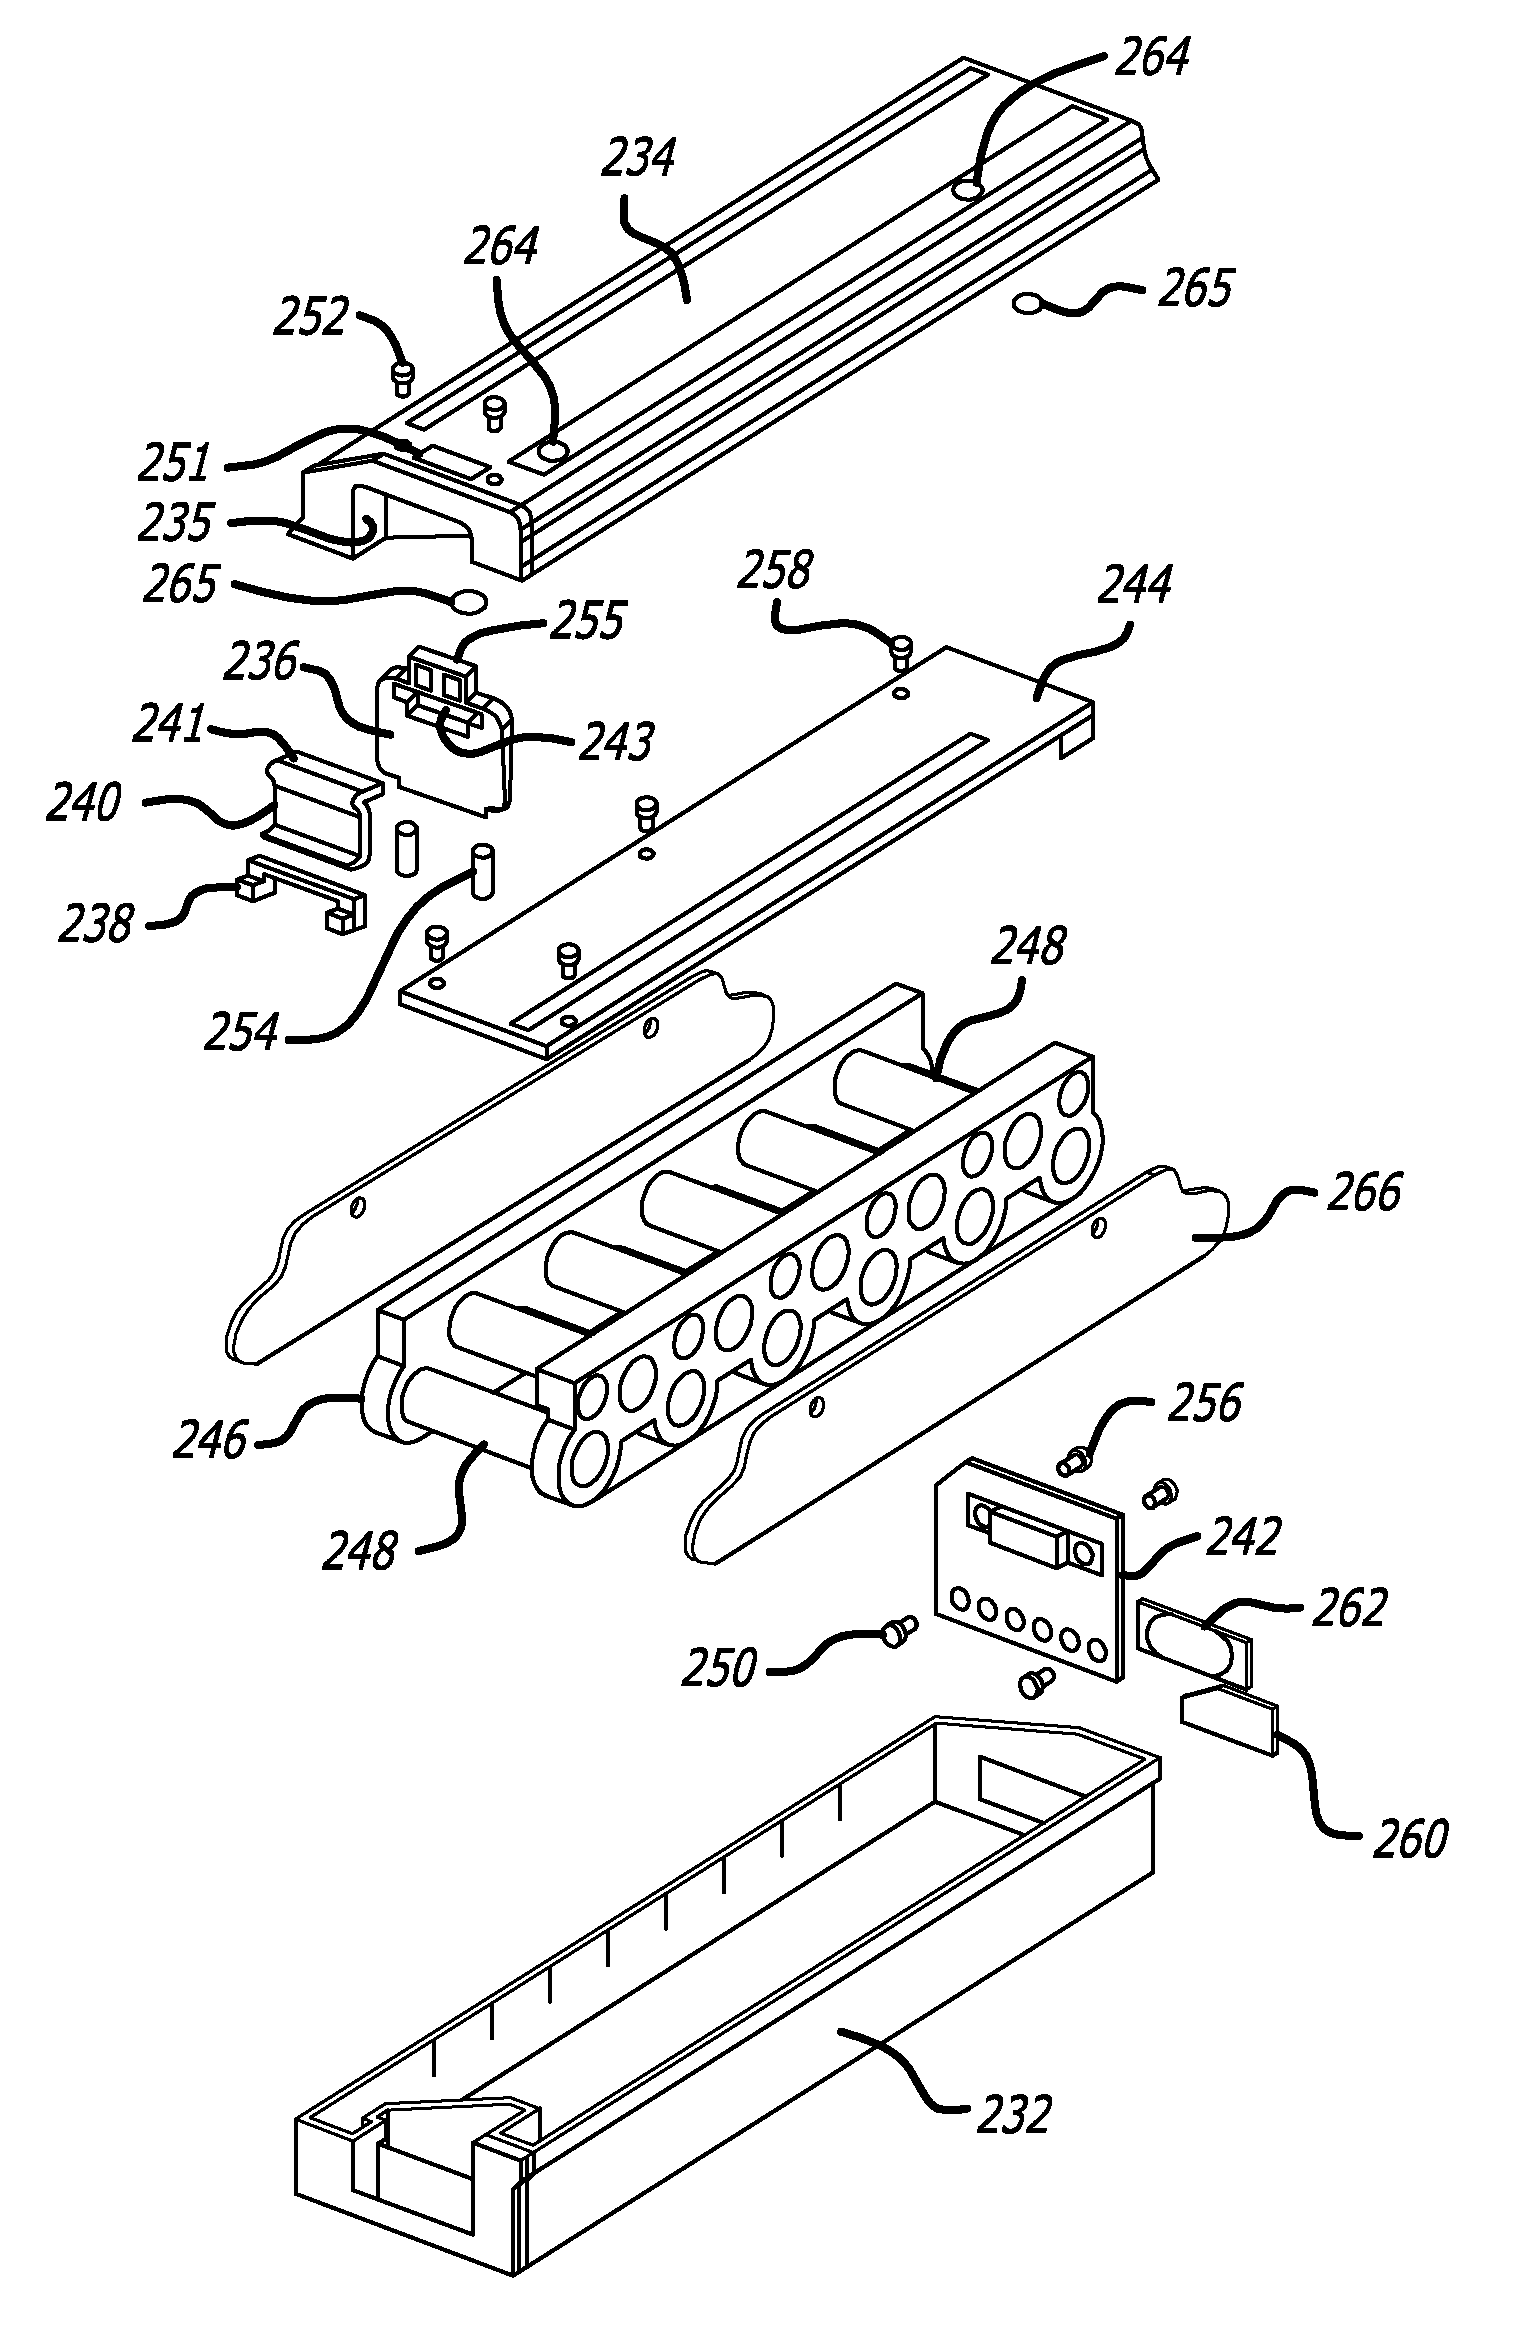 System and method for tracking and archiving battery performance data